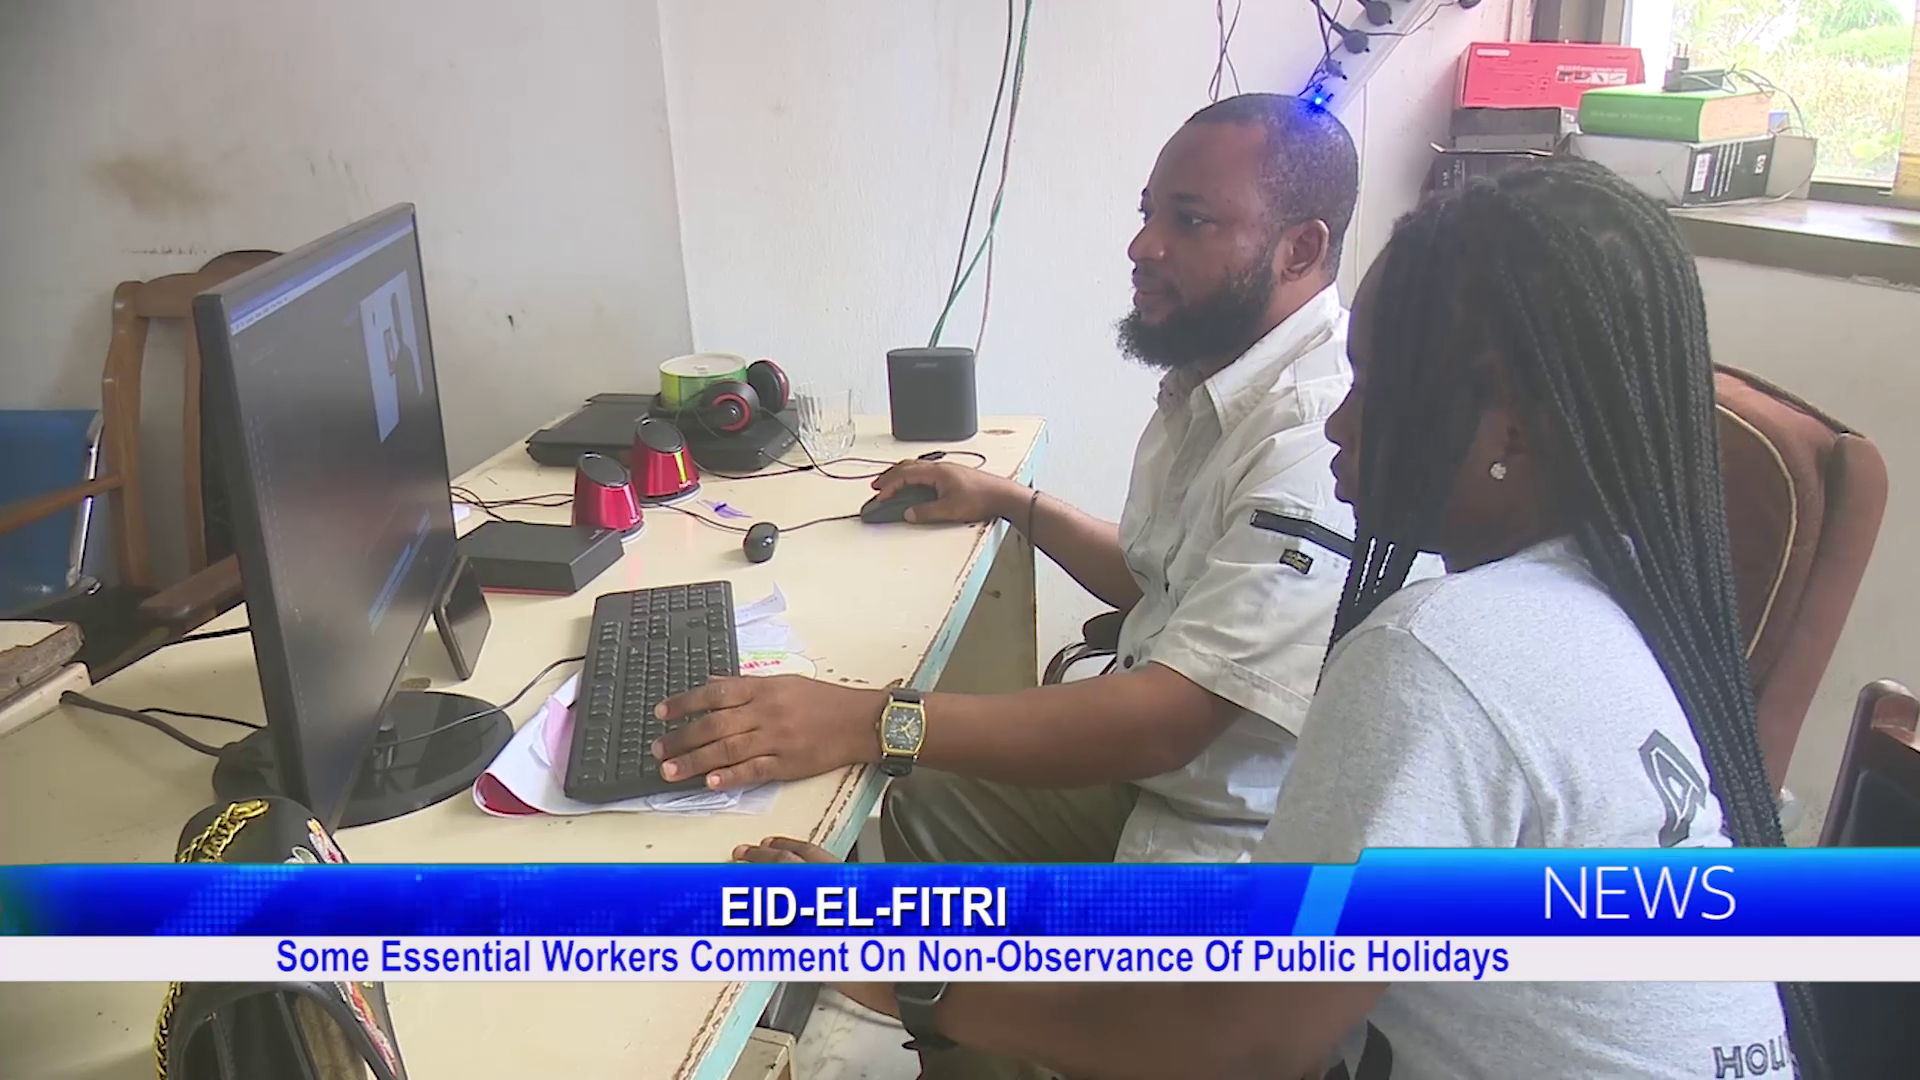 Some Essential Workers Comment On Non-Observance Of Public Holidays